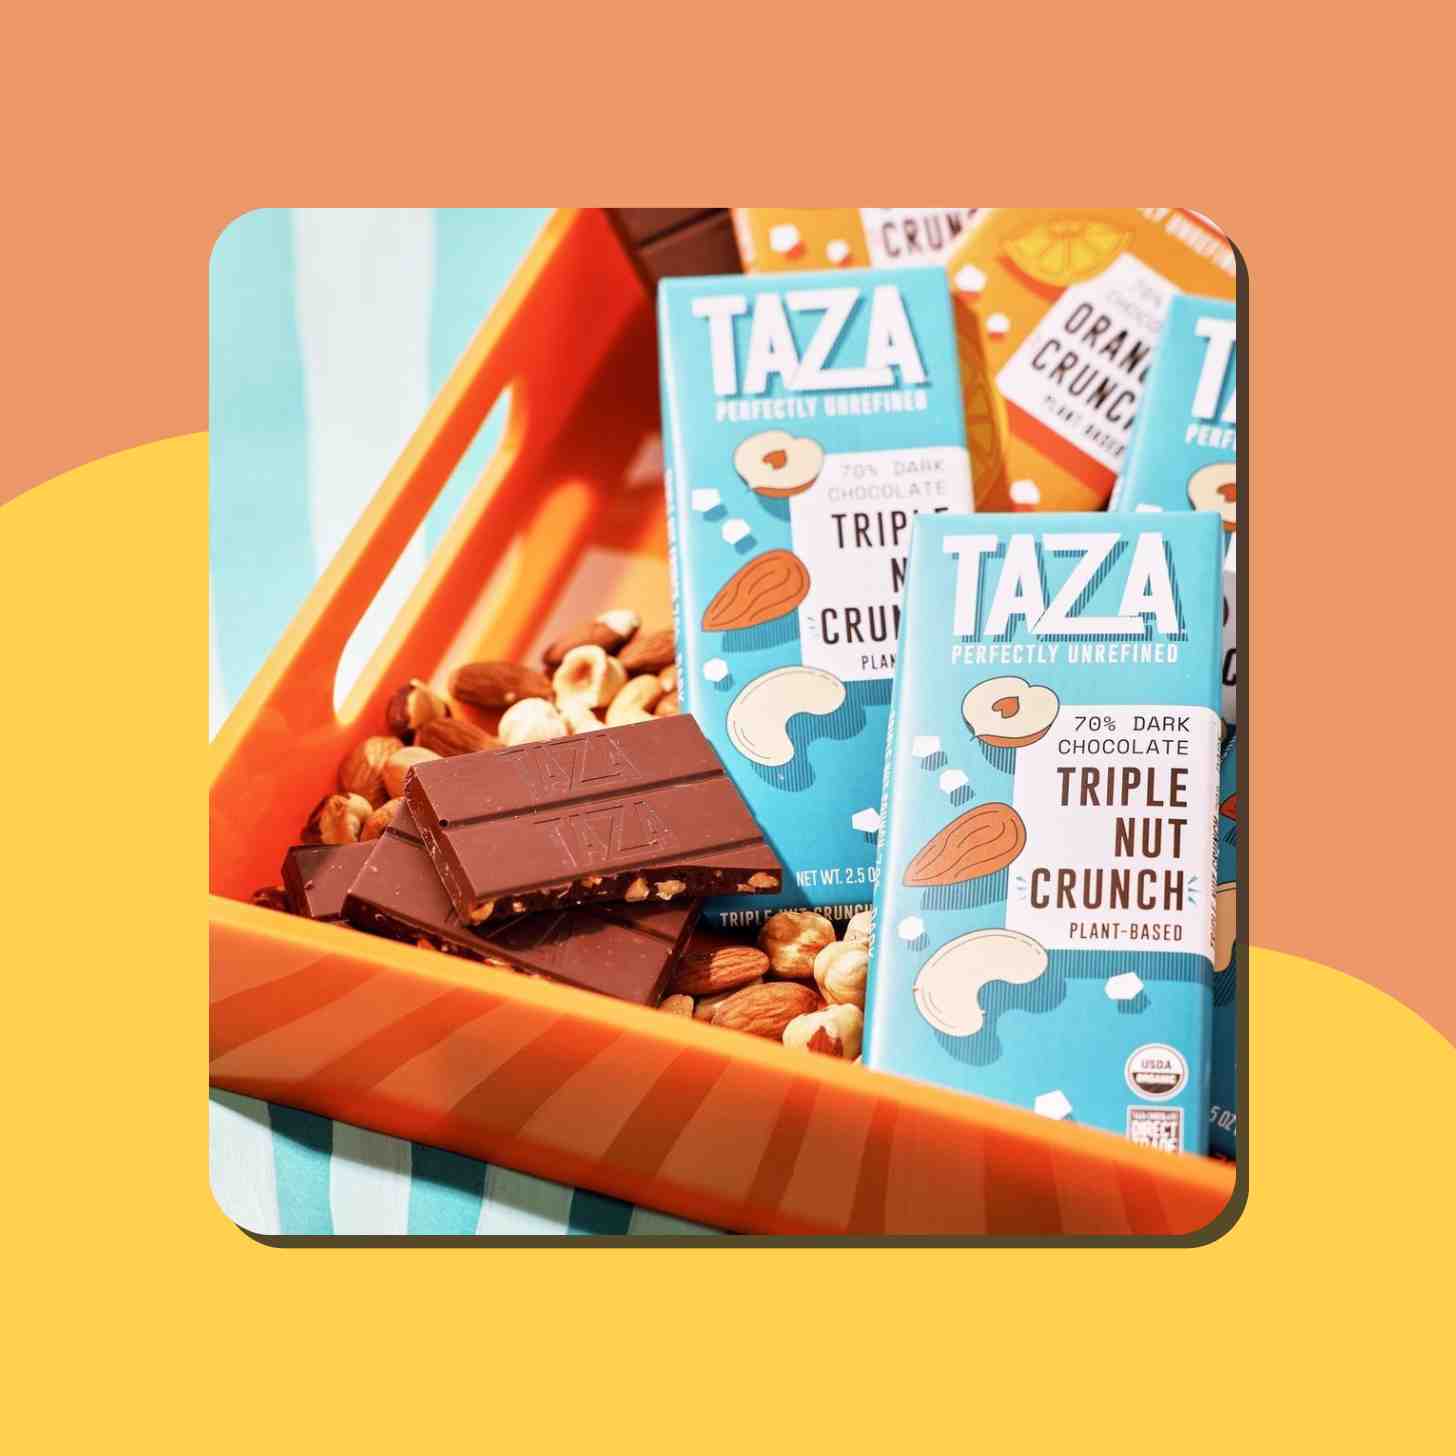 Many Bars Of Taza Chocolate Bars Inside A Box With Some Nuts And Almonds